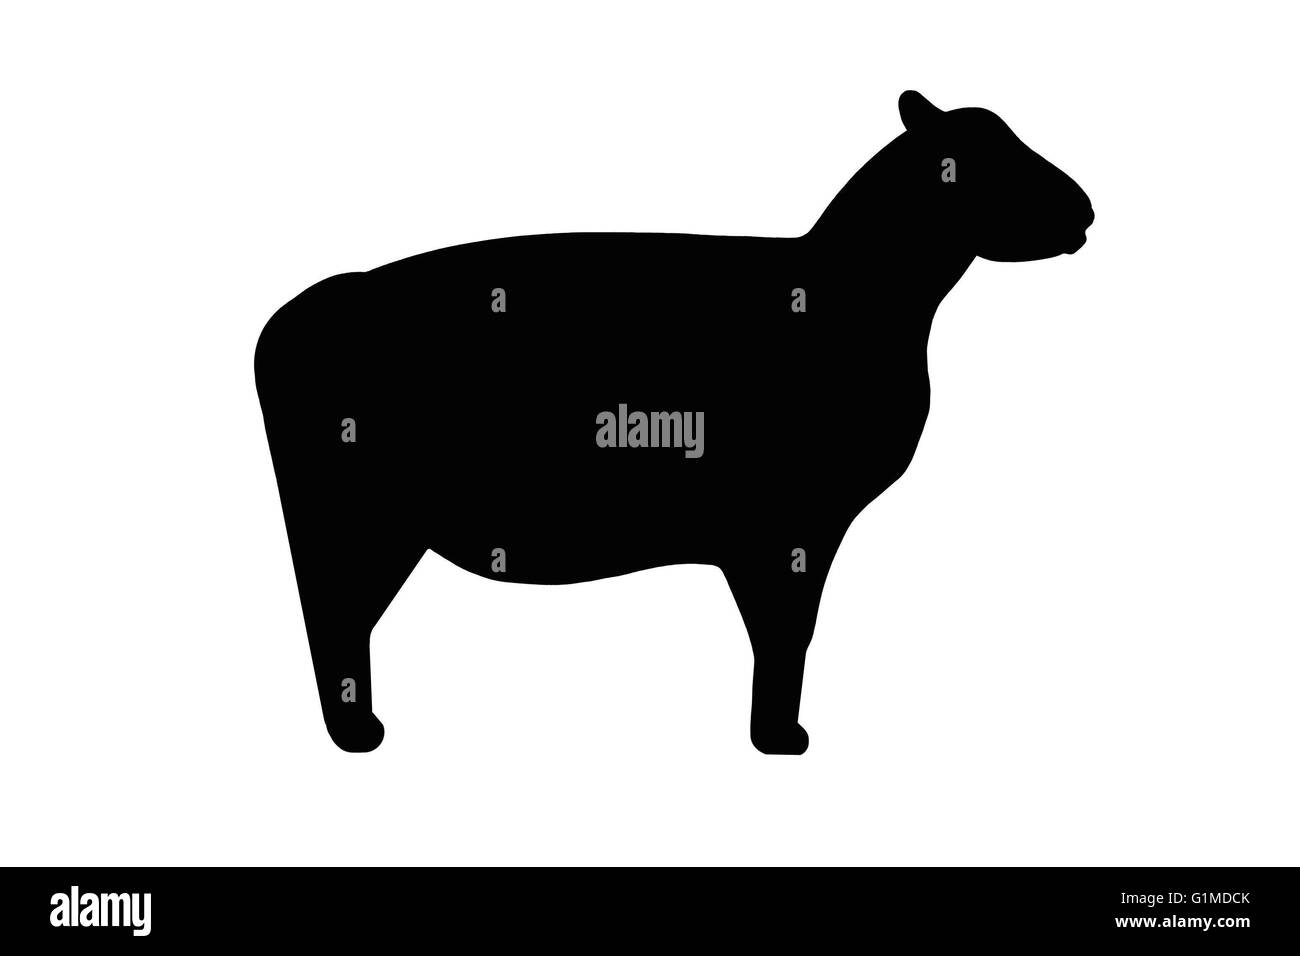 Sheep or stock animal silhouette in black isolated on white Stock Photo